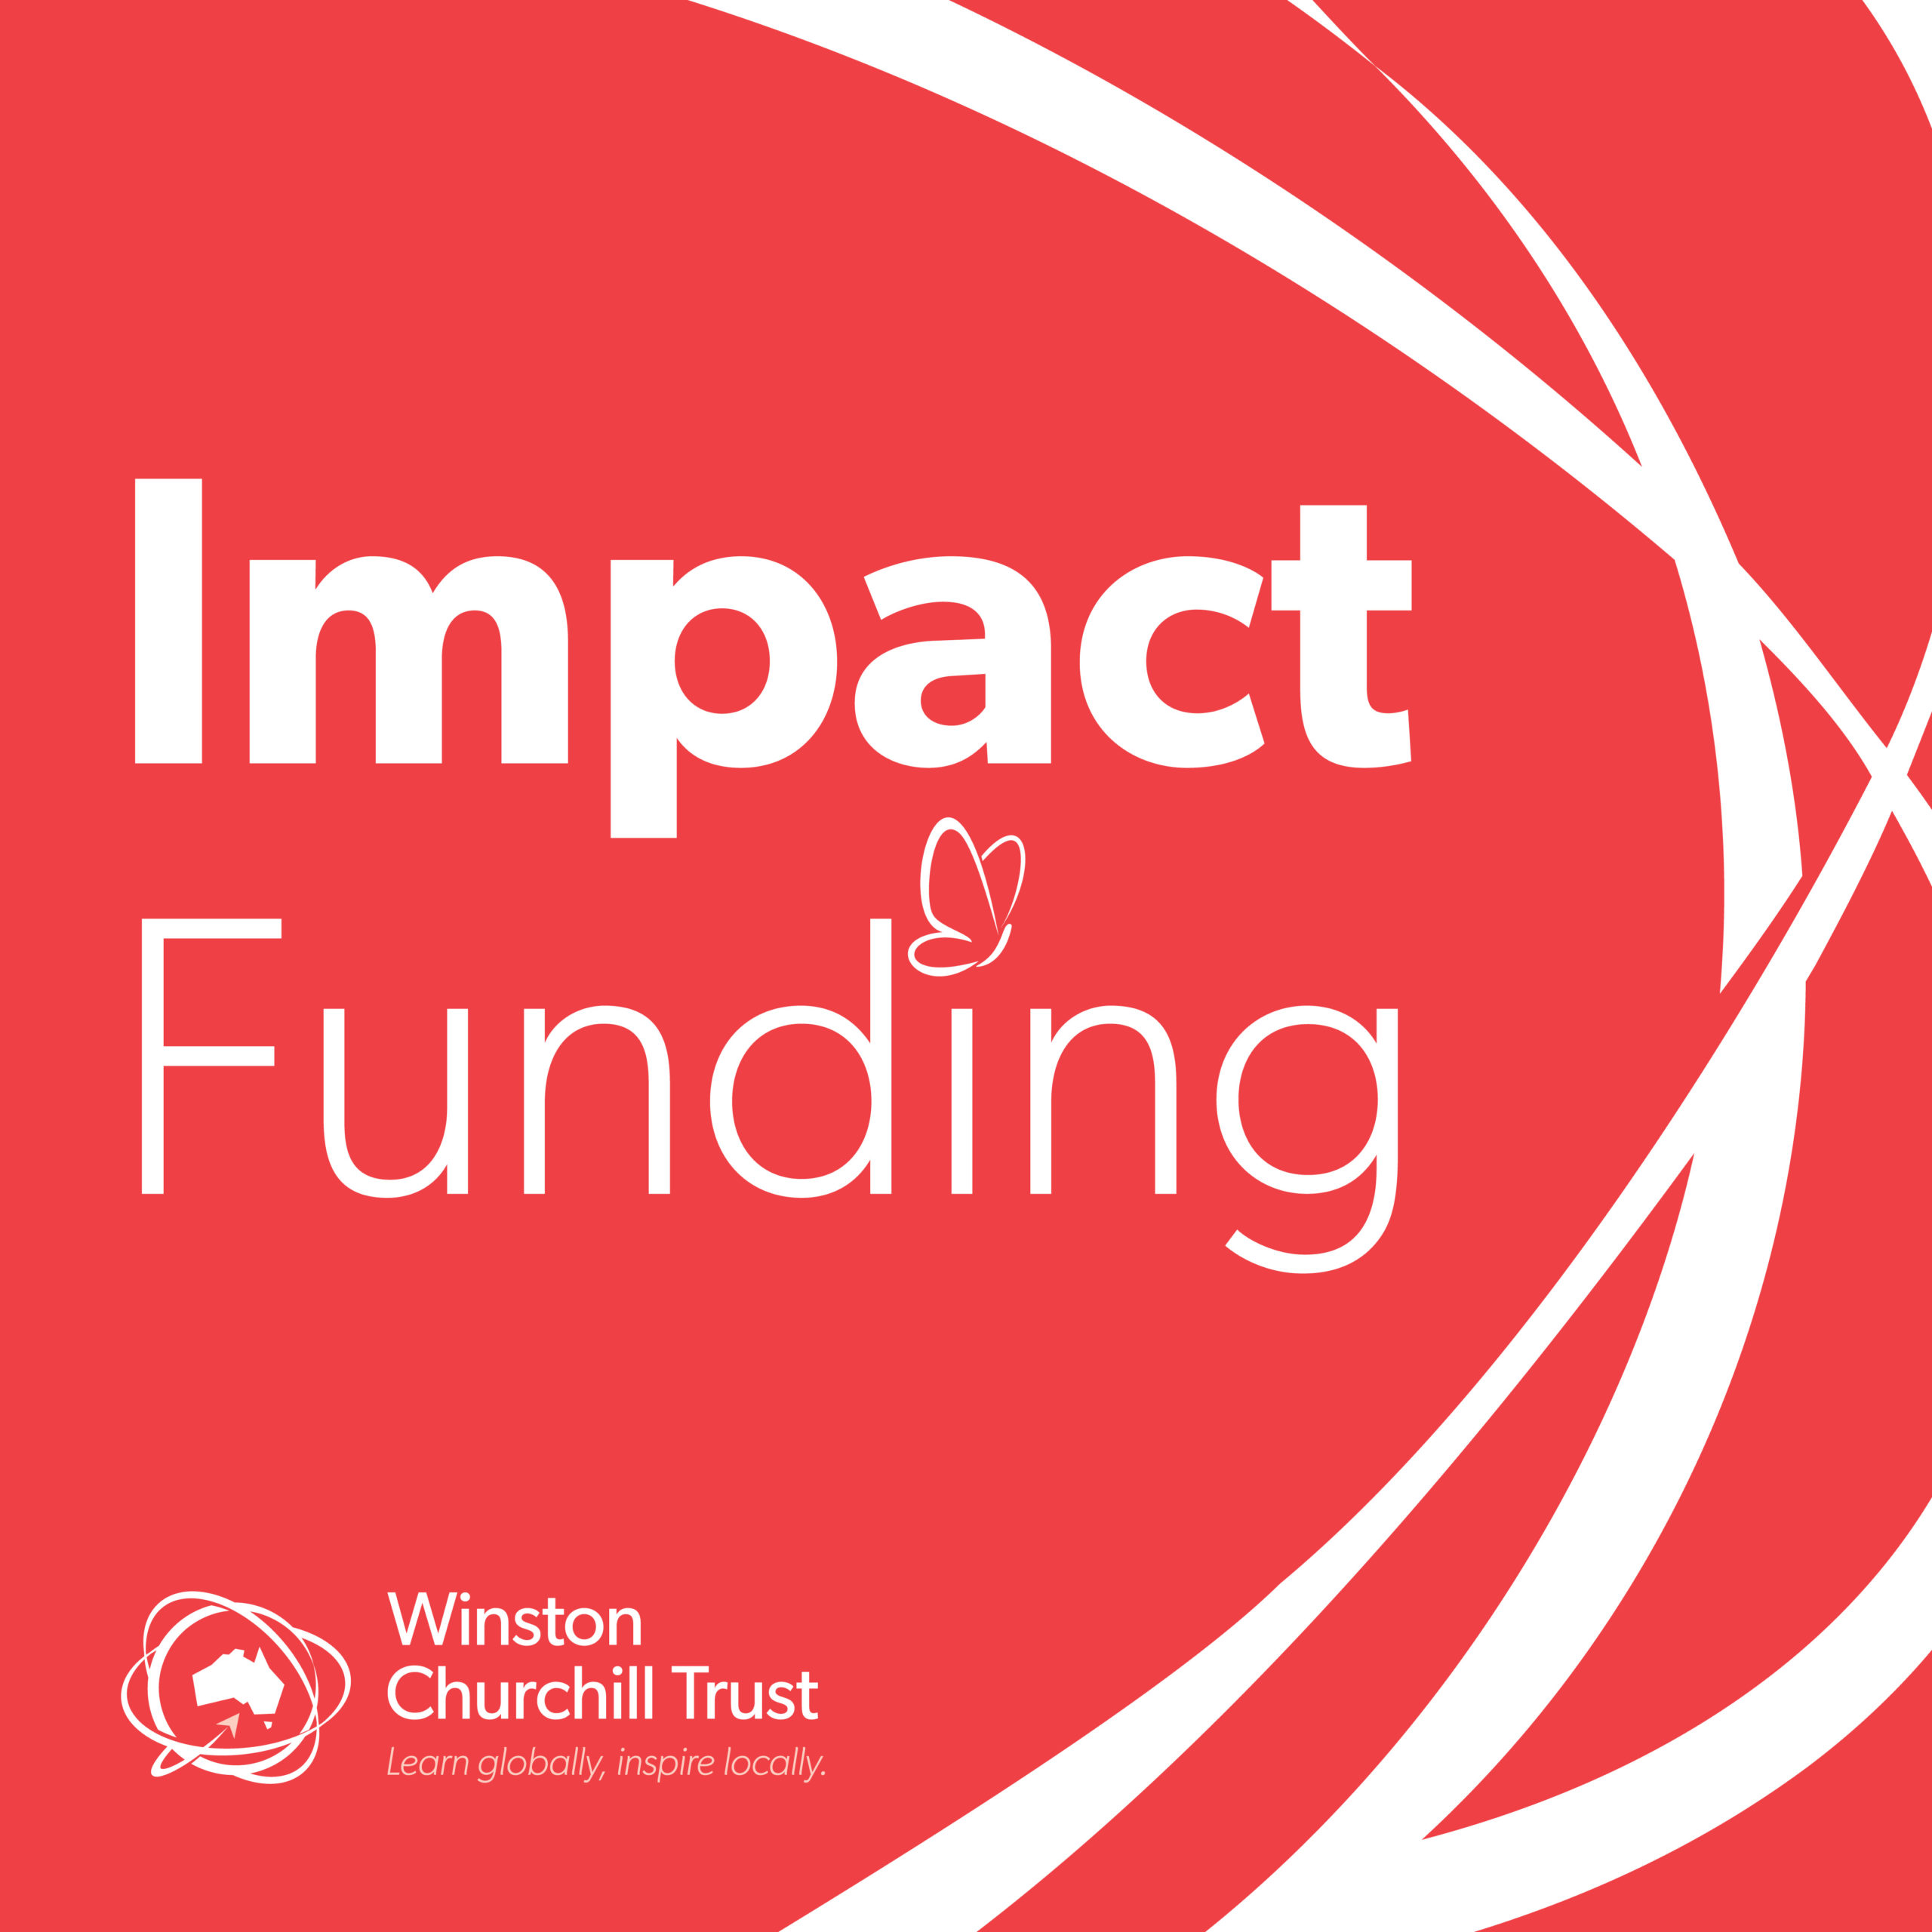 Fellow Impact Funding featured image